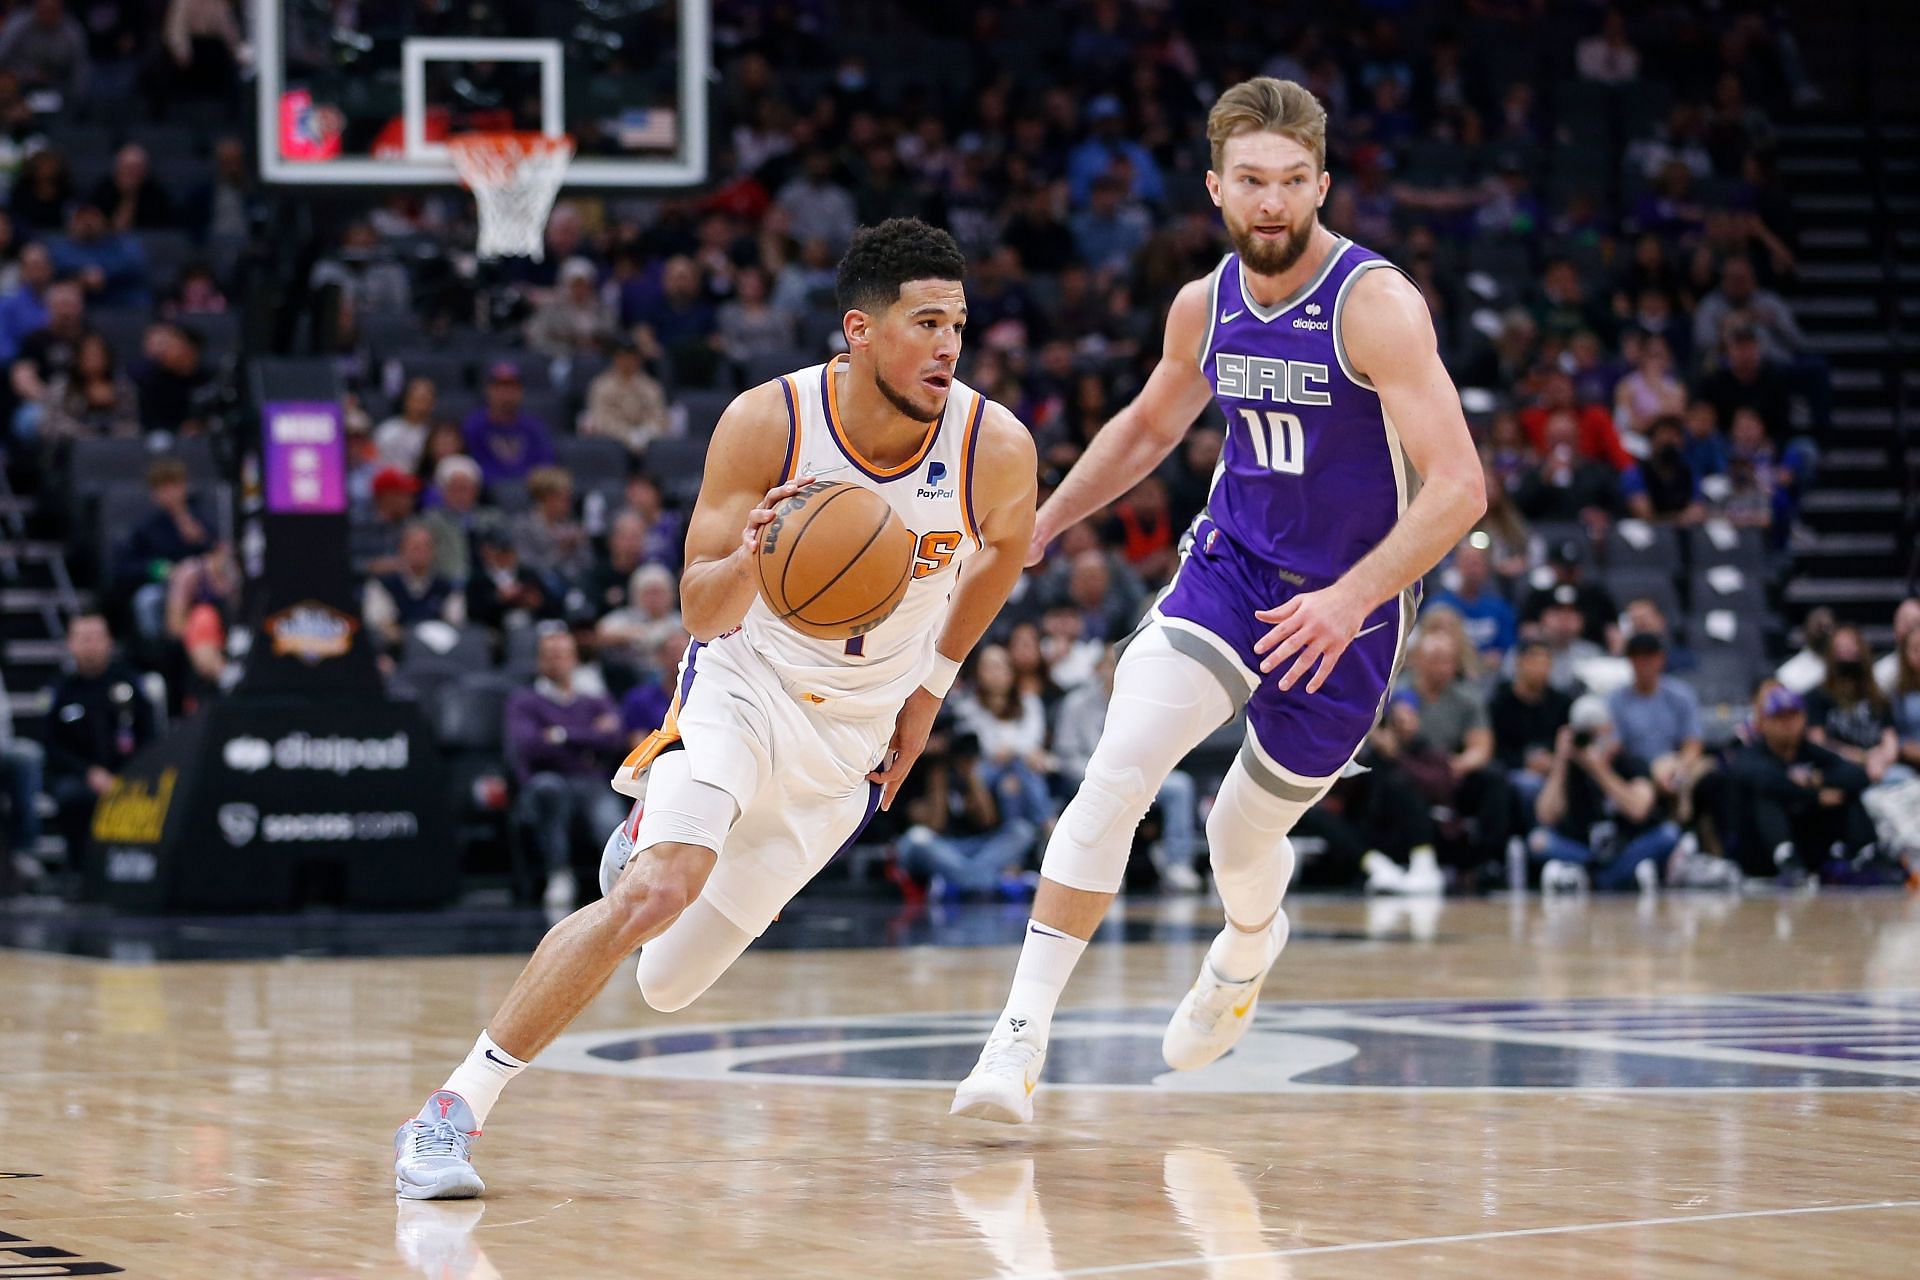 Devin Booker #1 of the Phoenix Suns dribbles the ball up court against Domantas Sabonis #10 of the Sacramento Kings in the first quarter at Golden 1 Center on March 20, 2022 in Sacramento, California.